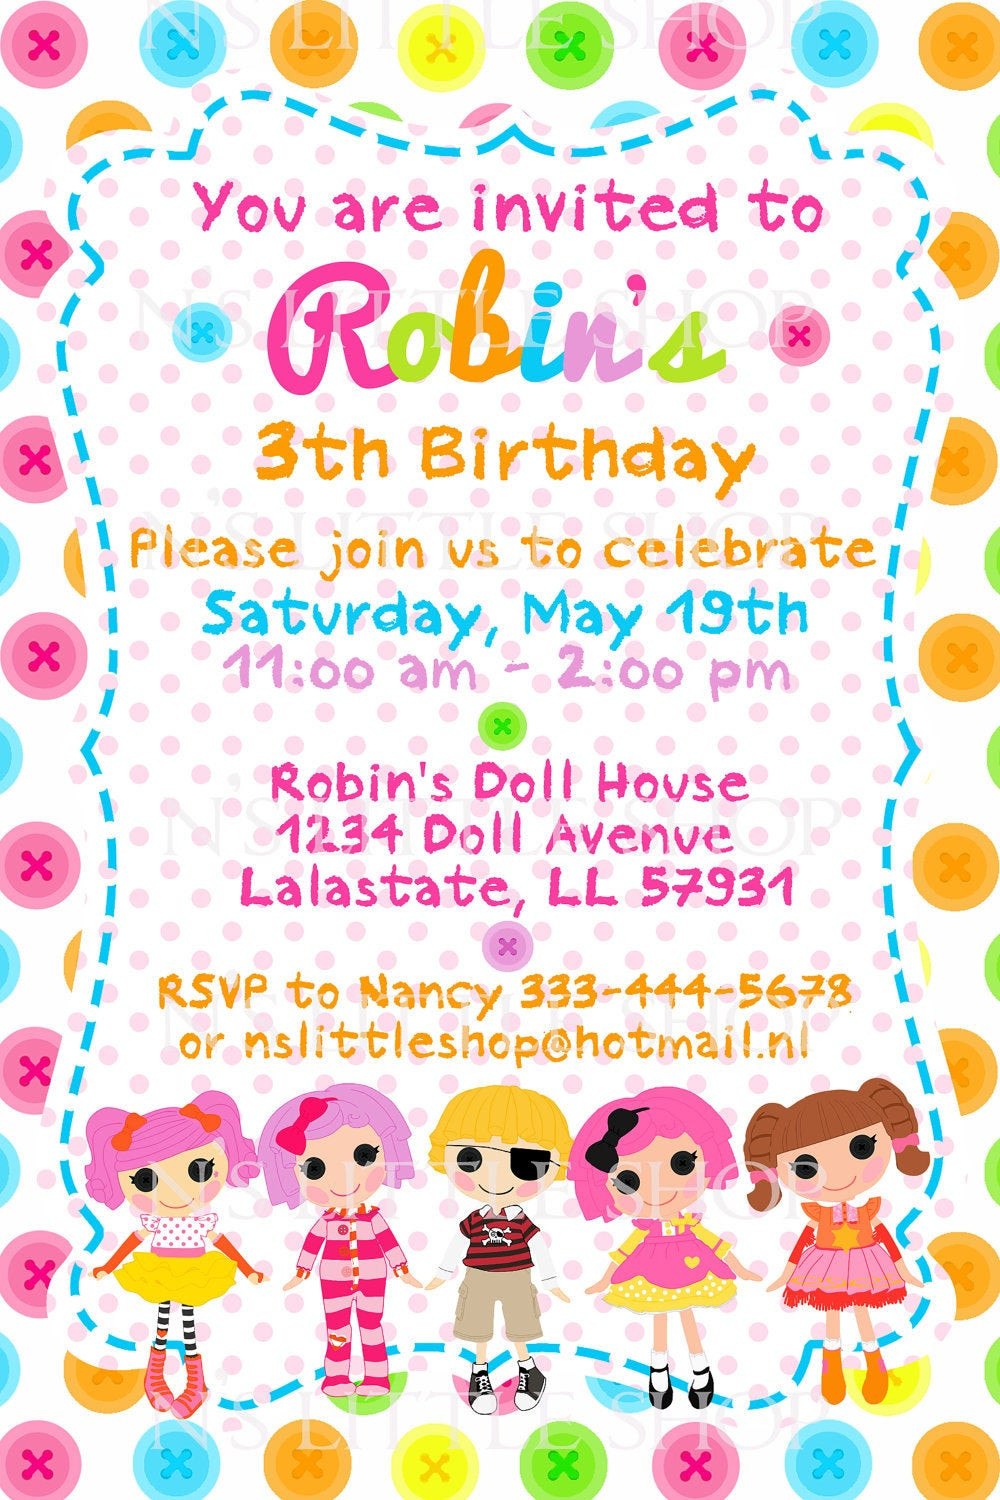 Invitation Cards For Birthday Party
 BUTTON DOLL birthday invitation card customize by